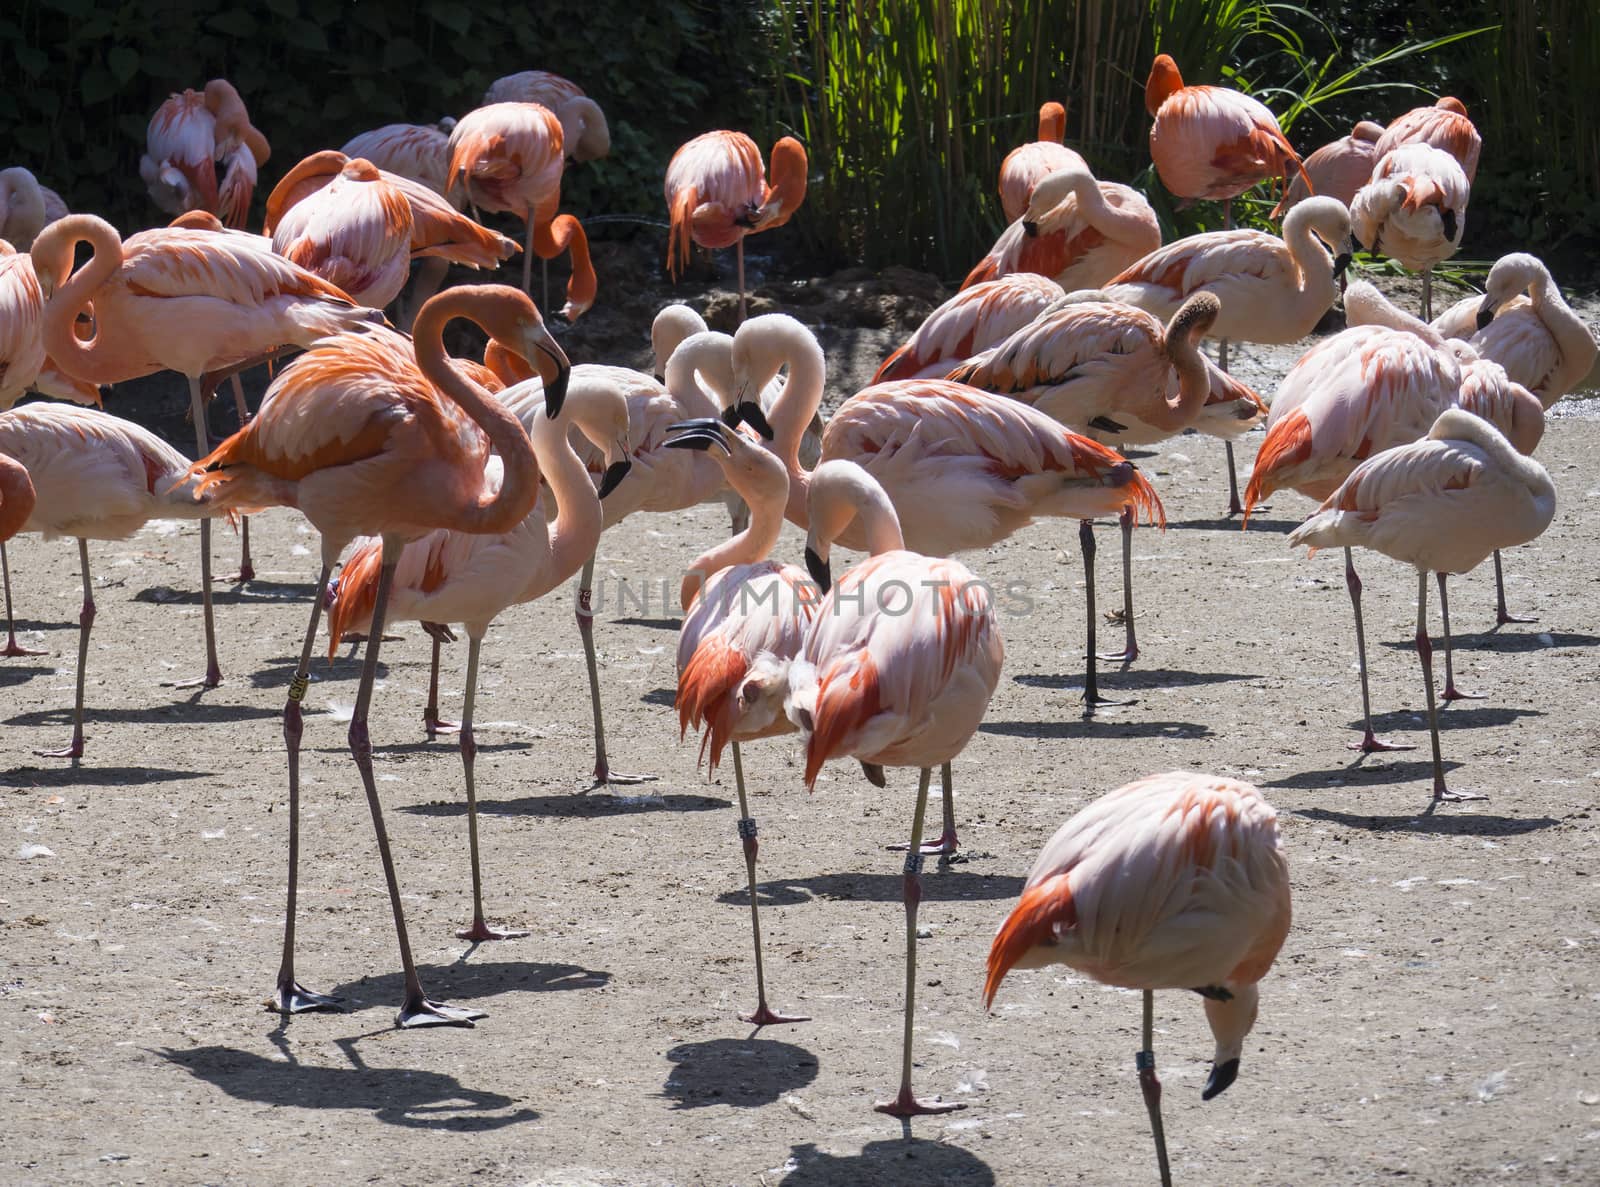 Group of red and pink flamingos standing on dirt. Chilean flamingo Phoenicopterus chilensis and The American flamingo Phoenicopterus ruber